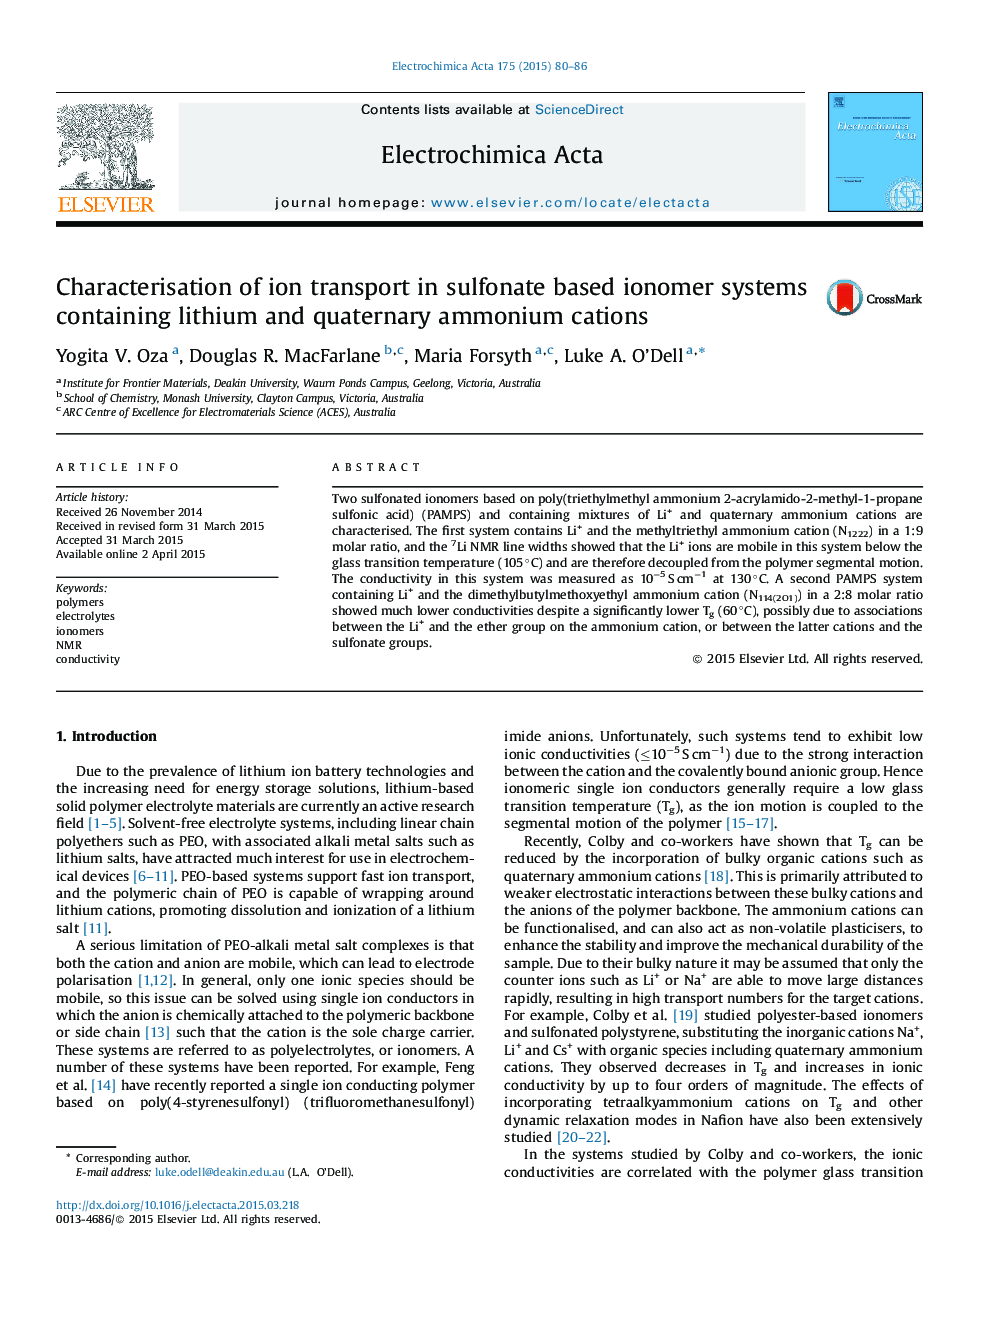 Characterisation of ion transport in sulfonate based ionomer systems containing lithium and quaternary ammonium cations